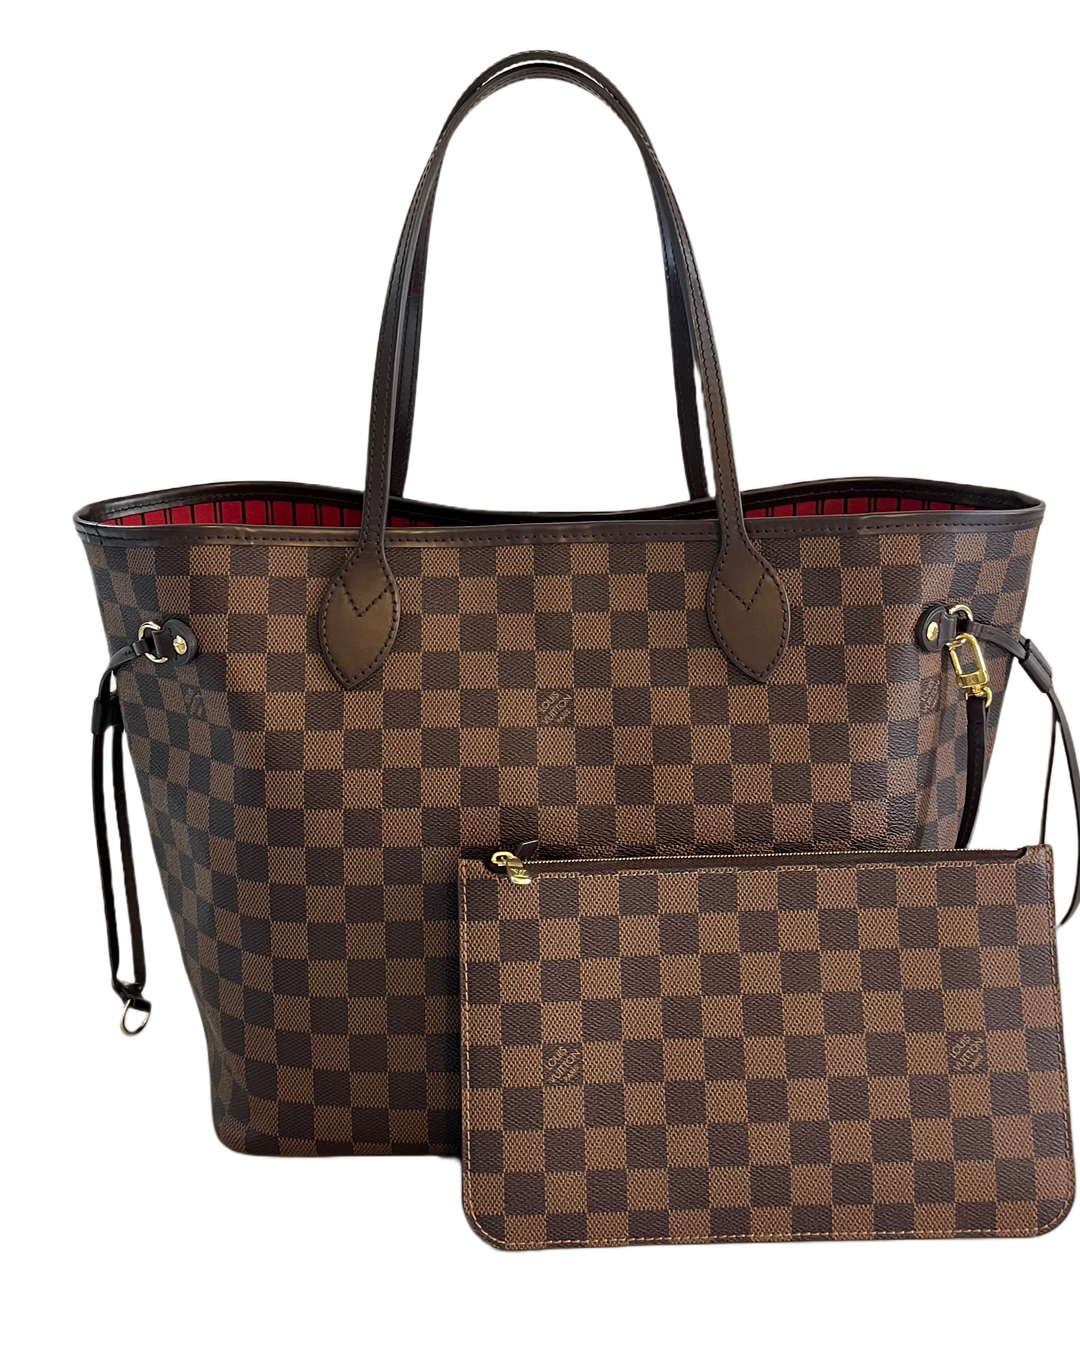 Authentic Louis Vuitton Neverfull MM (excellent condition) for Sale in